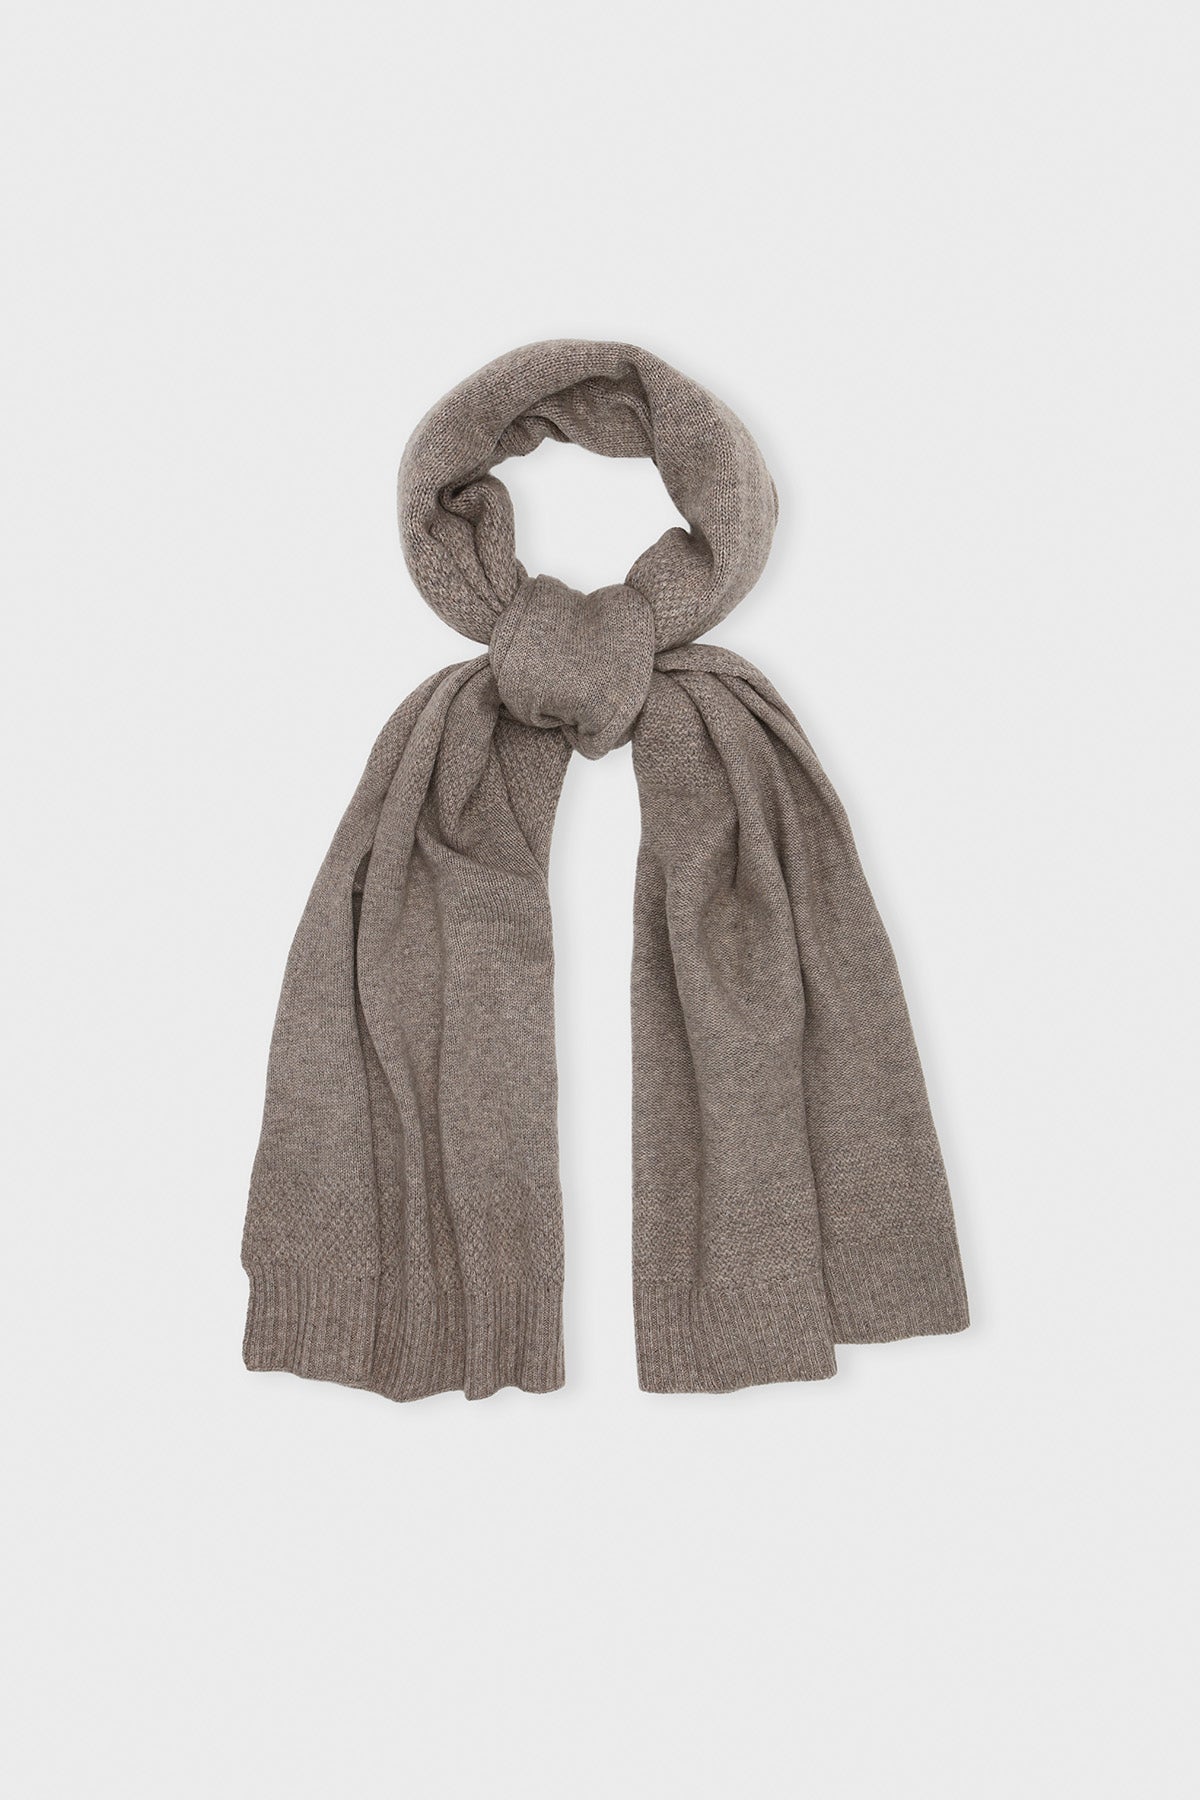 CARE BY ME 100% Cashmere Womens Mea Scarf